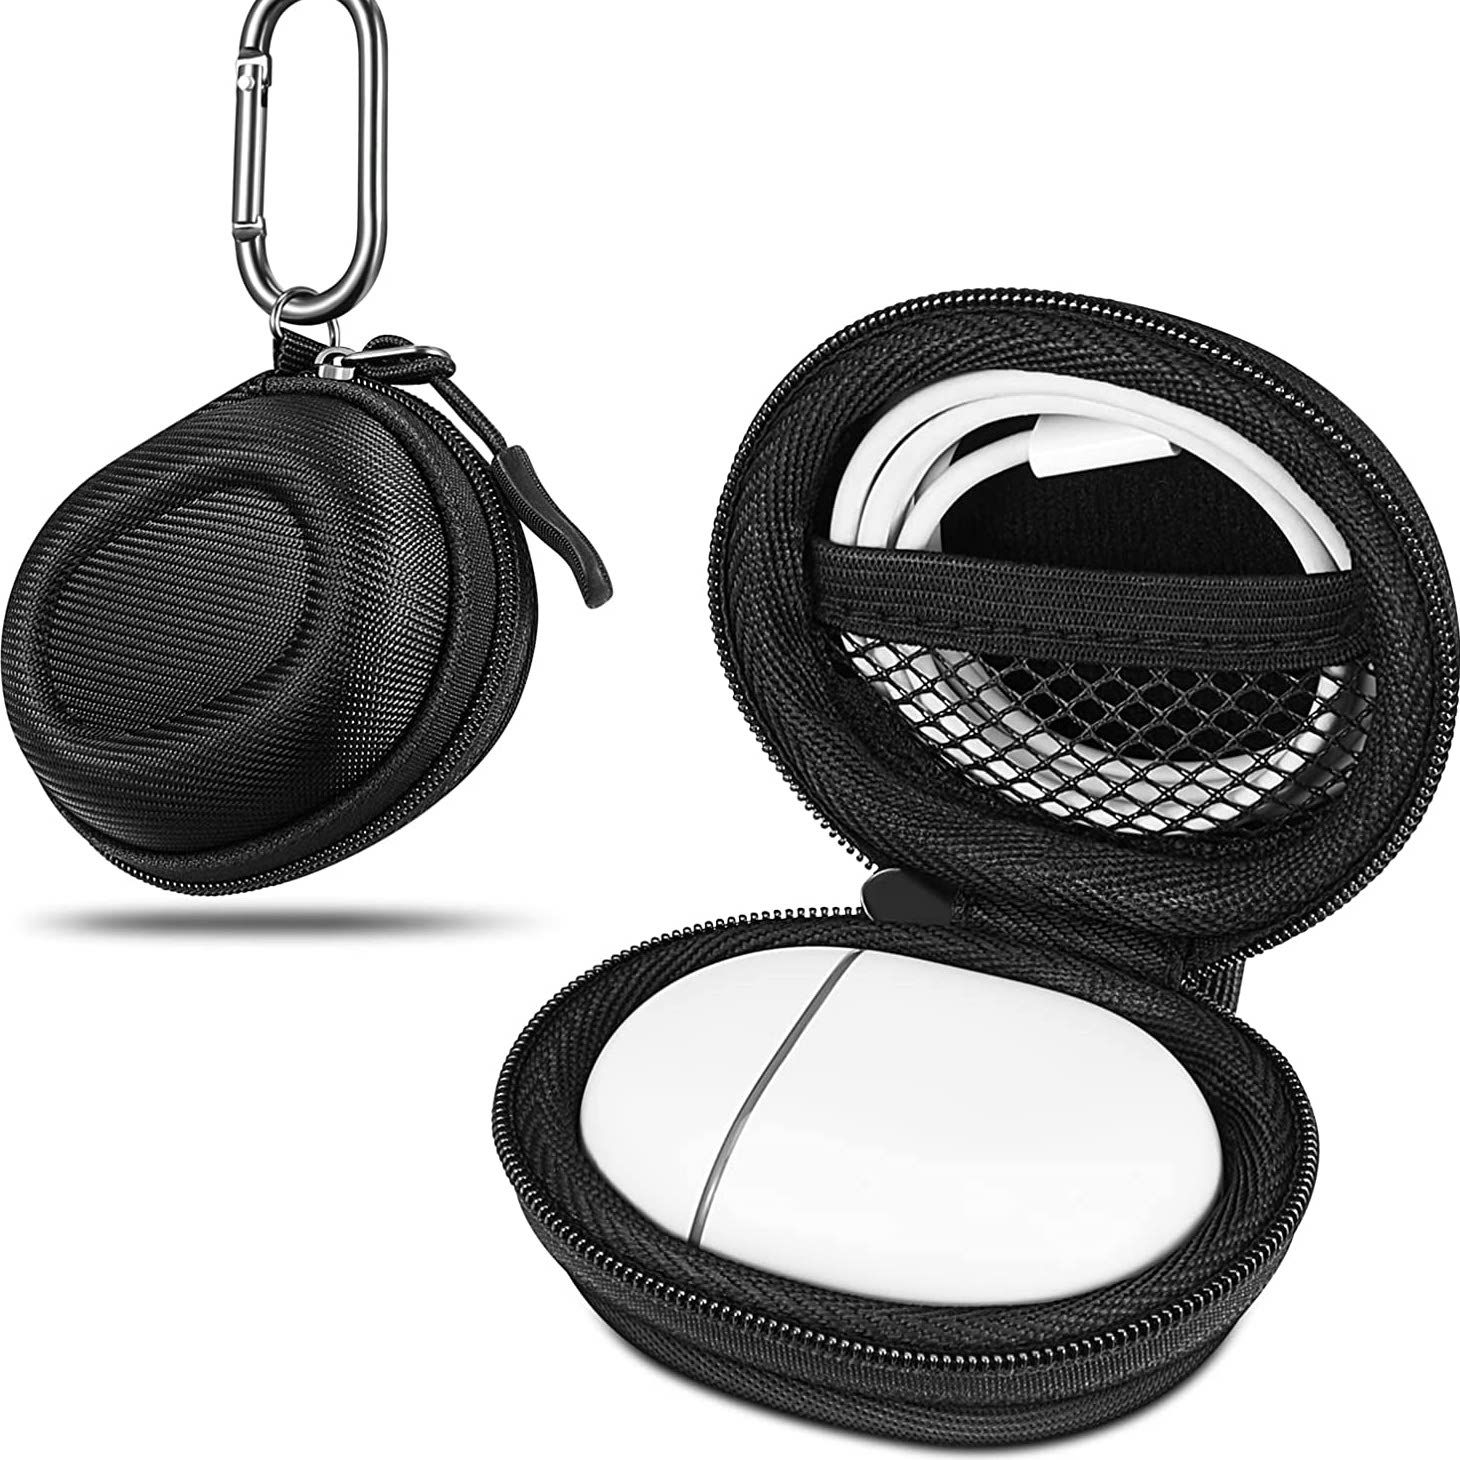  Case for Google Pixel Buds Pro Earbuds, BGAANM